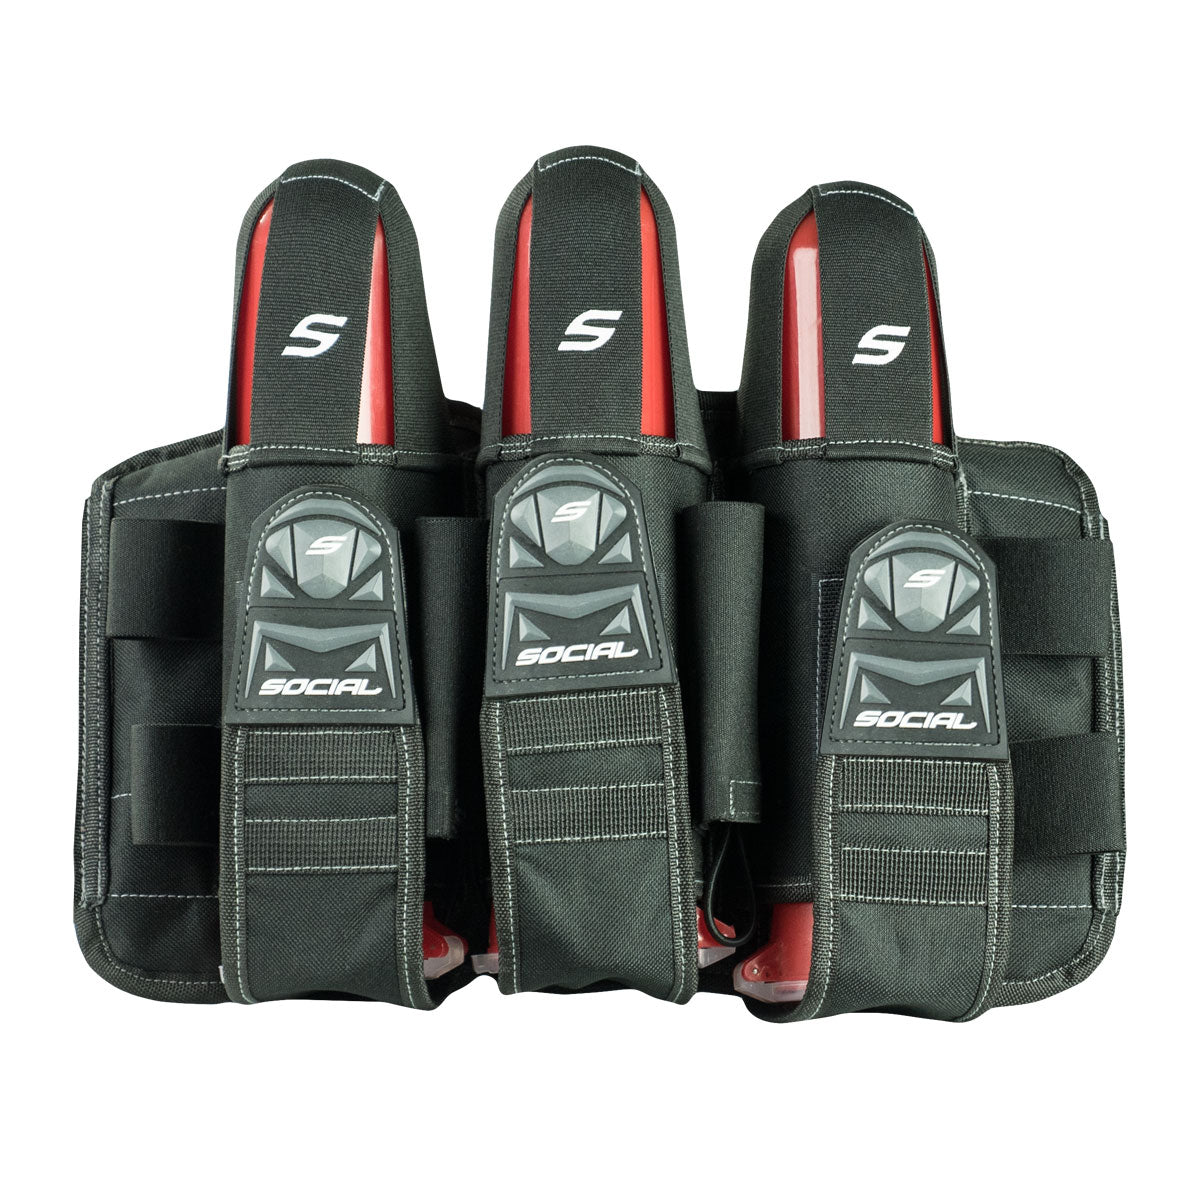 Grit Pod Pack Harness, 3+6, Stealth Black | Social Paintball Harness